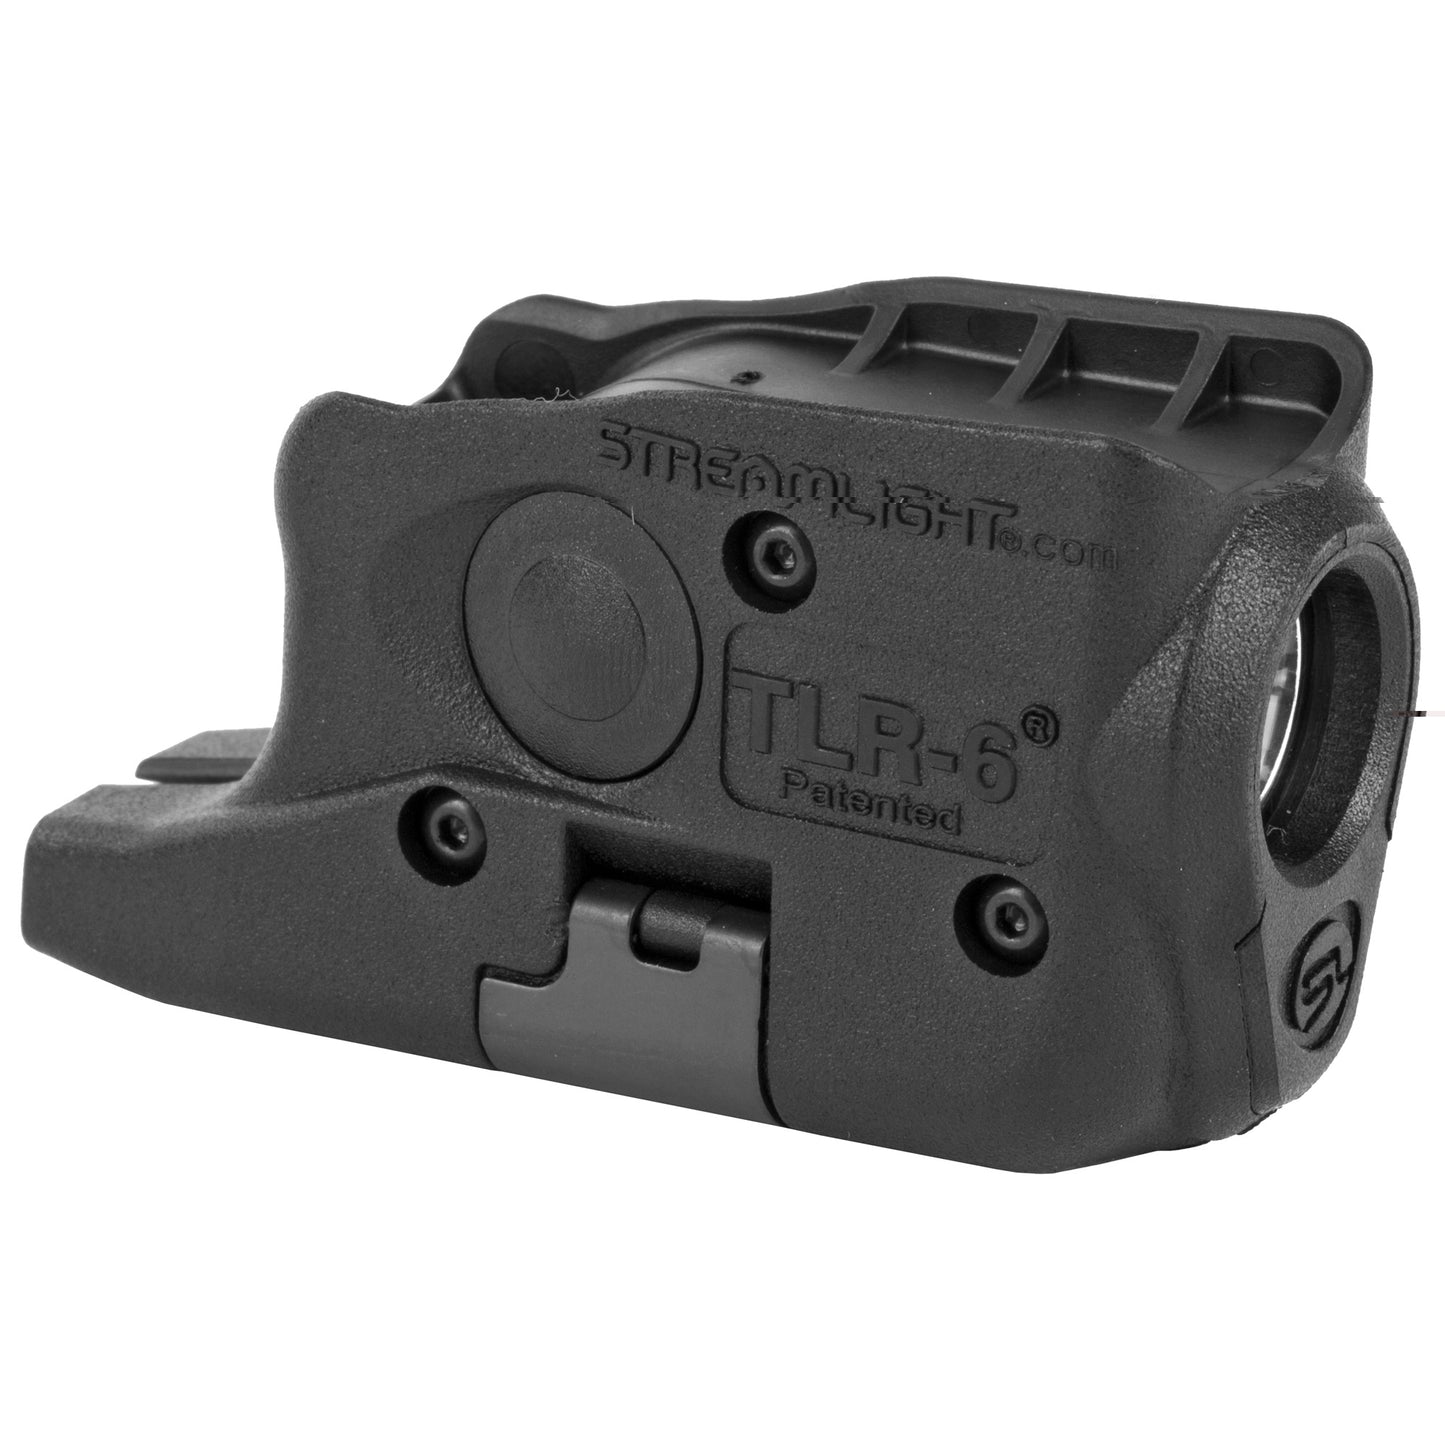 Streamlight, TLR-6, Weaponlight, Fits Glk 26/27/33, White LED 100 Lumens, Includes 2 CR 1/3N Lithium Batteries, Black